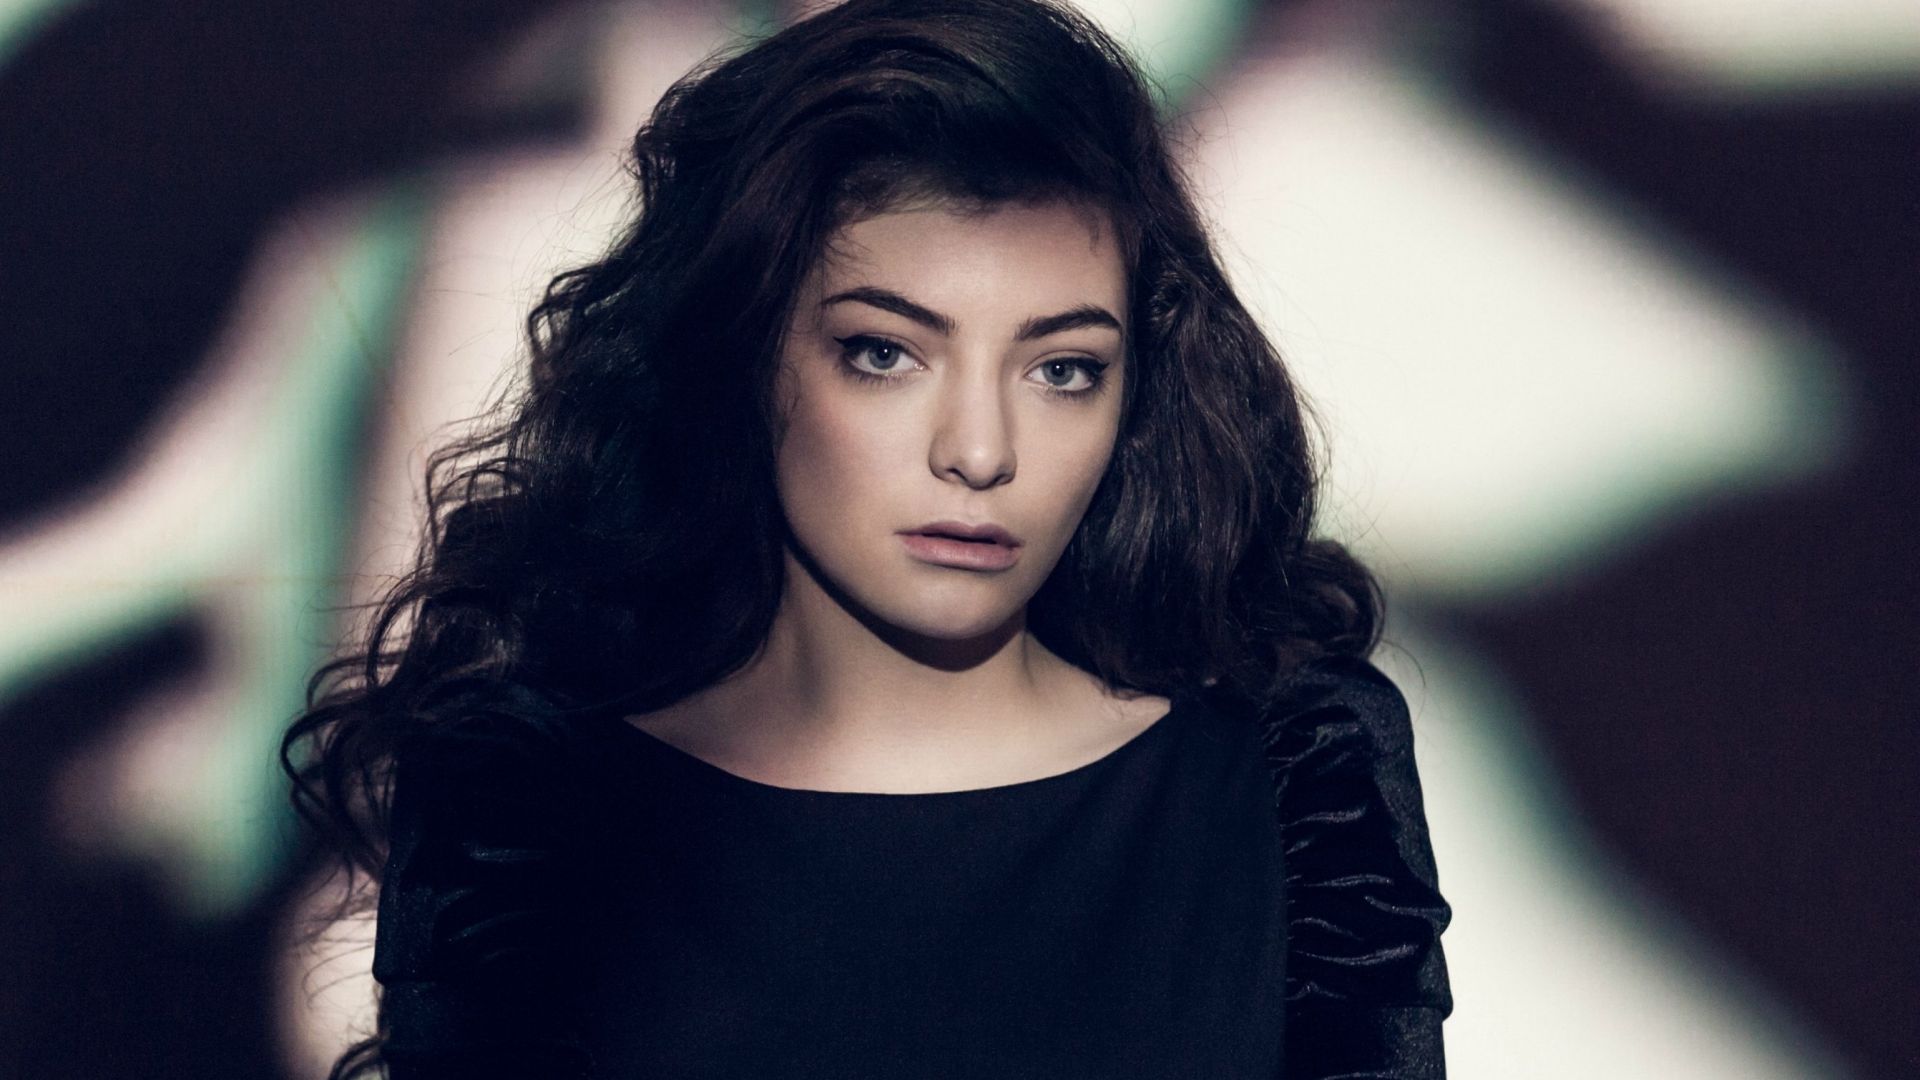 Desktop wallpaper lorde, famous and gorgeous singer, HD image, picture, background, 3cfe56